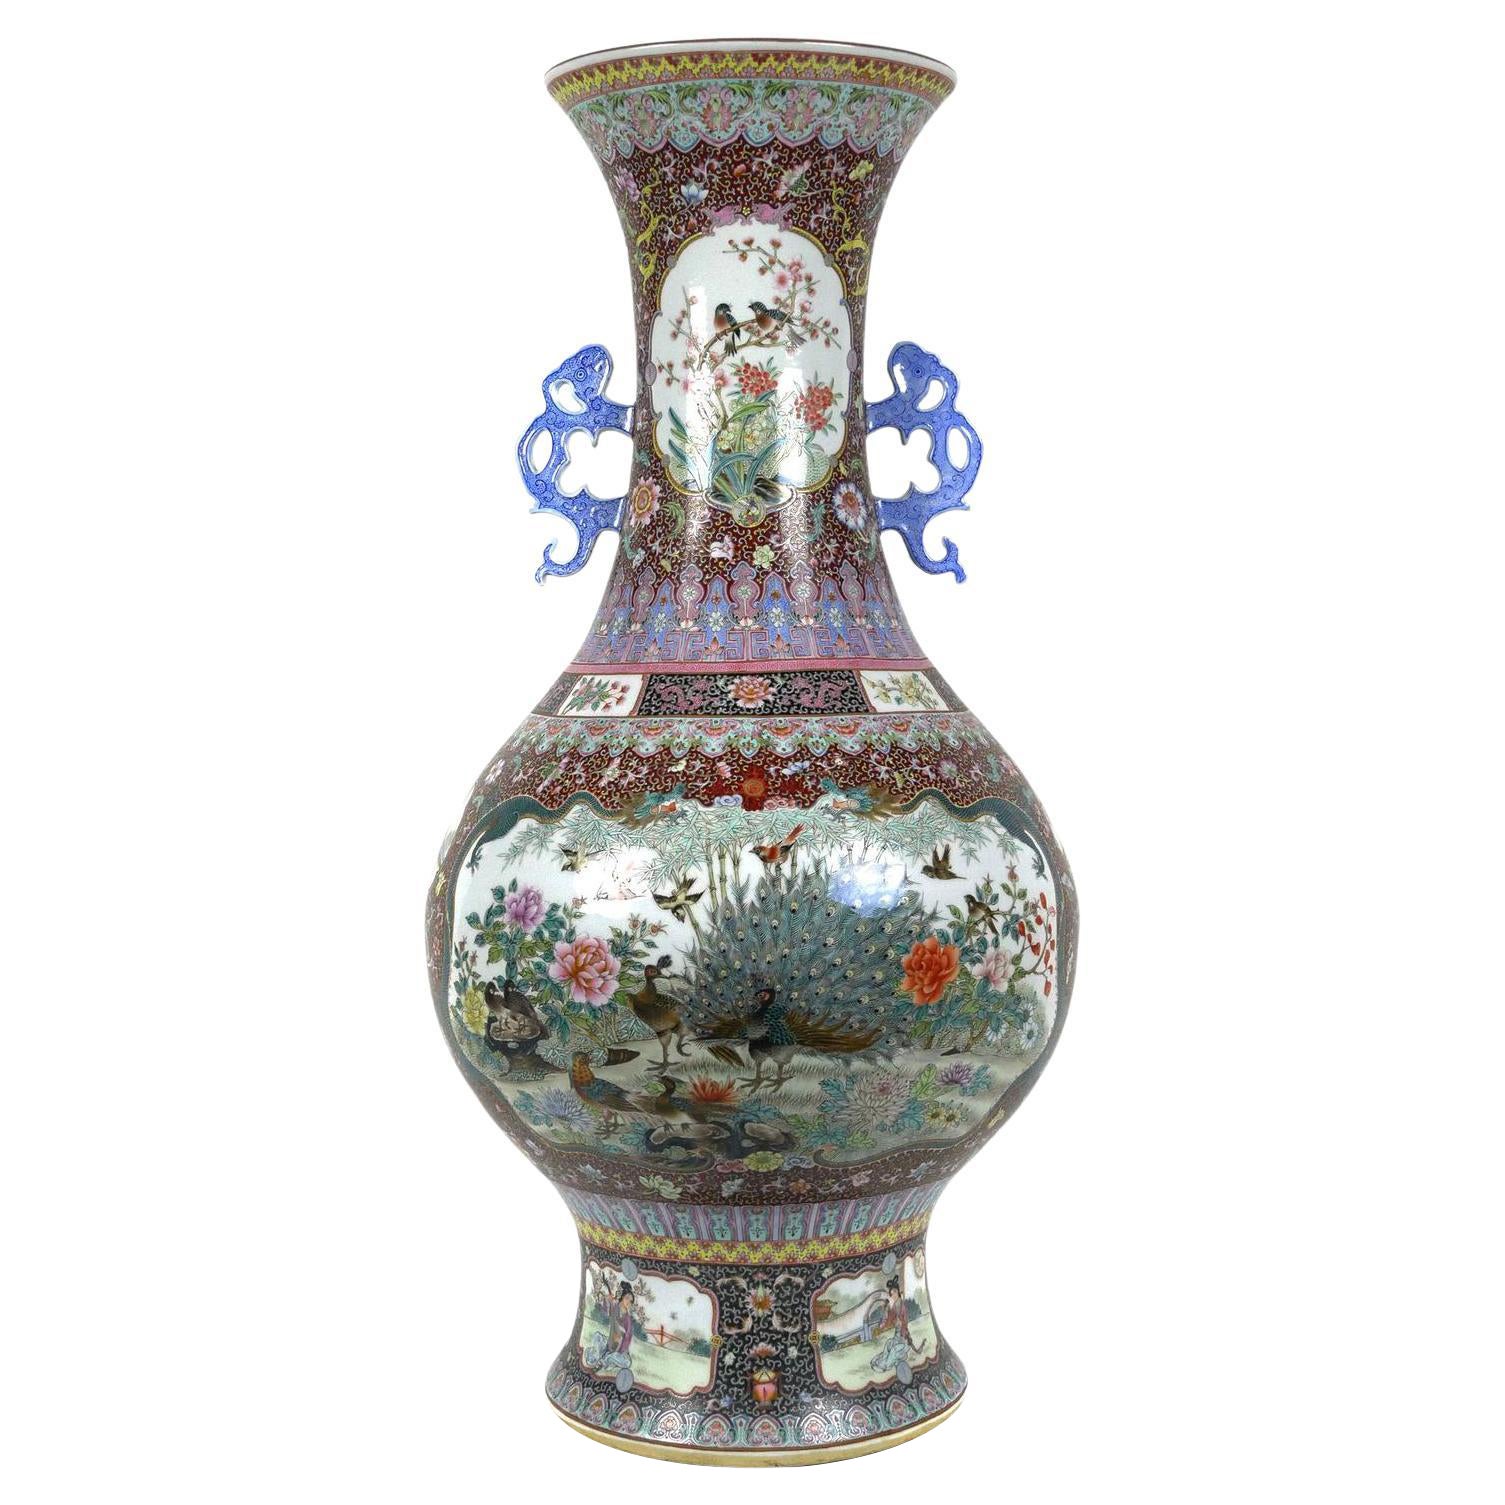 Monumental Chinese Famille Rose Porcelain "Peacock" Palace Vase